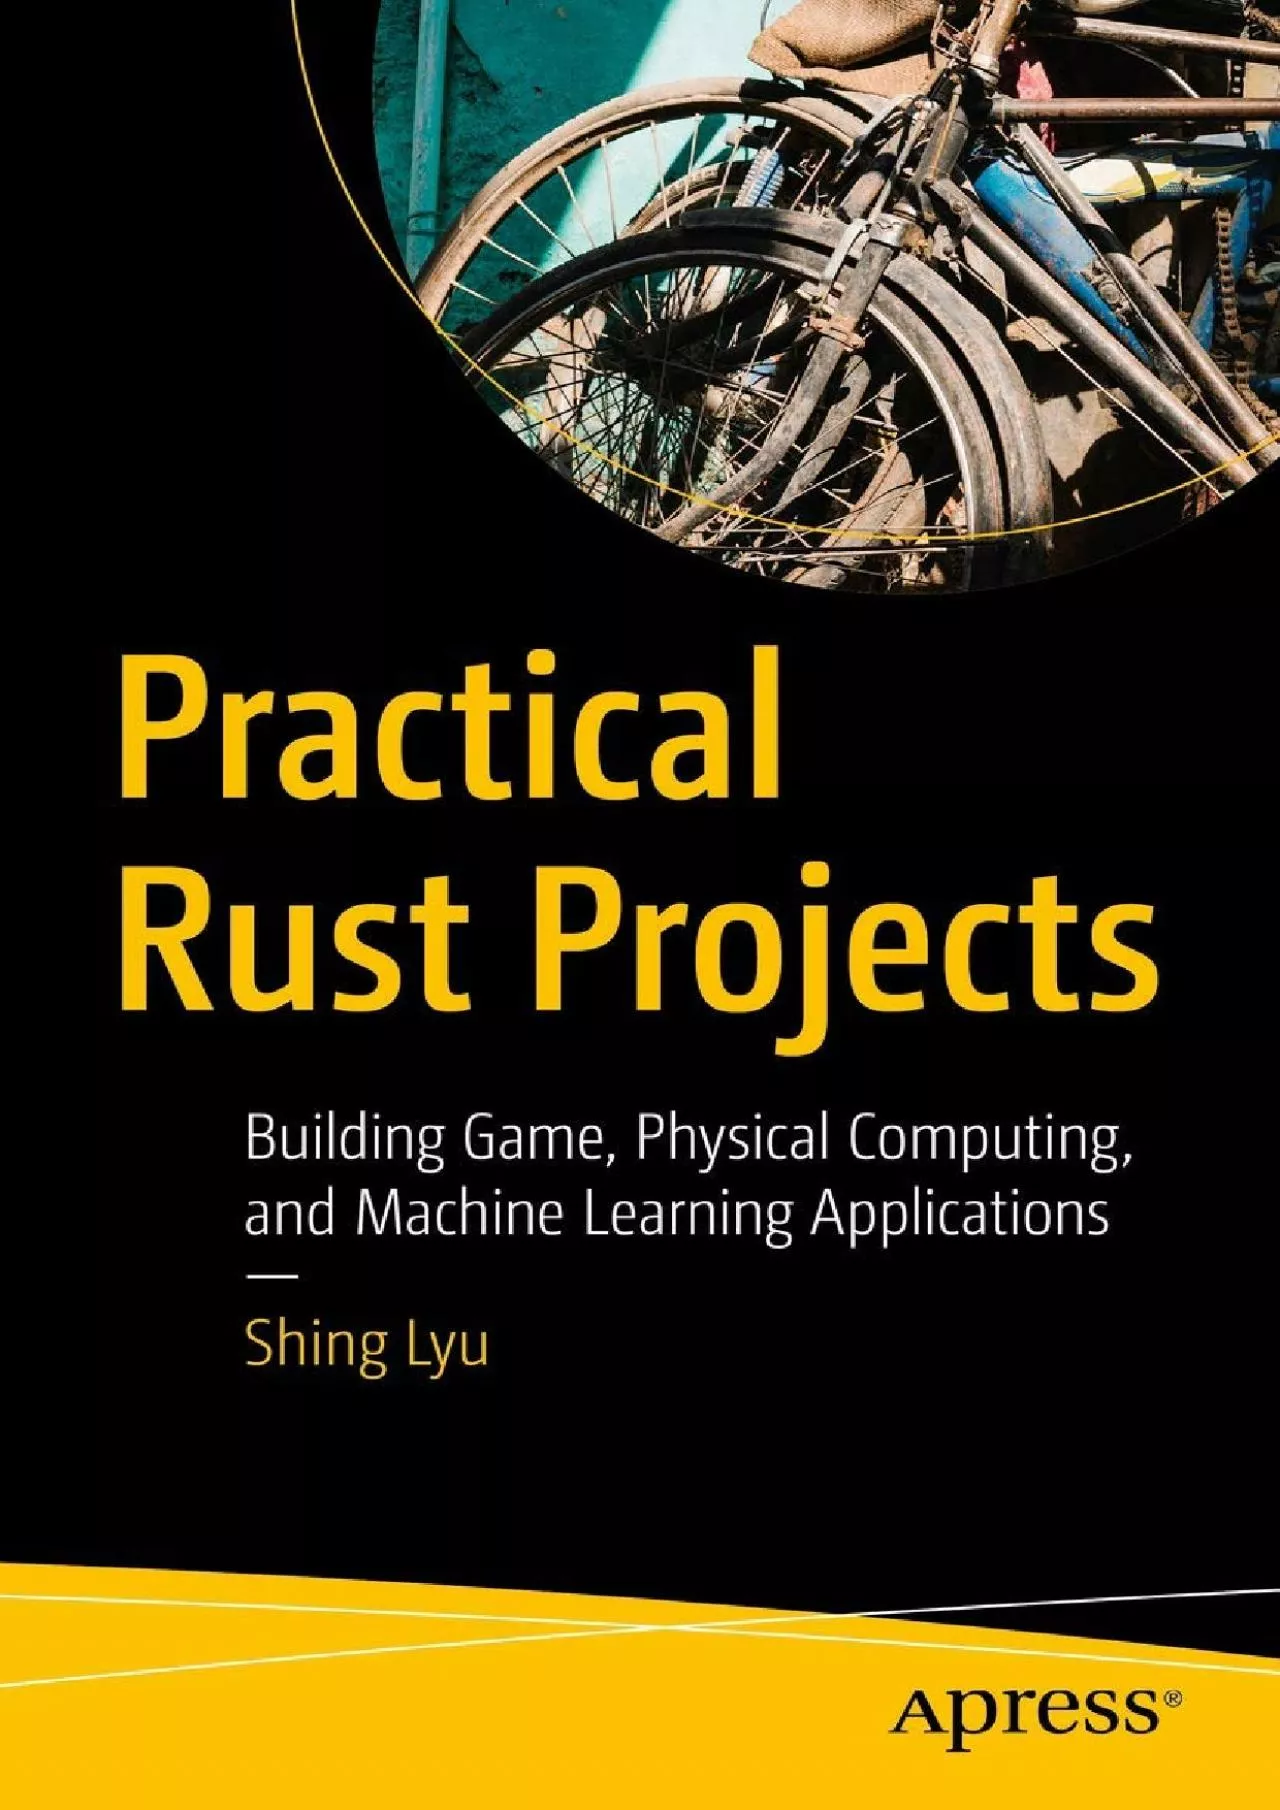 [eBOOK]-Practical Rust Projects: Building Game, Physical Computing, and Machine Learning